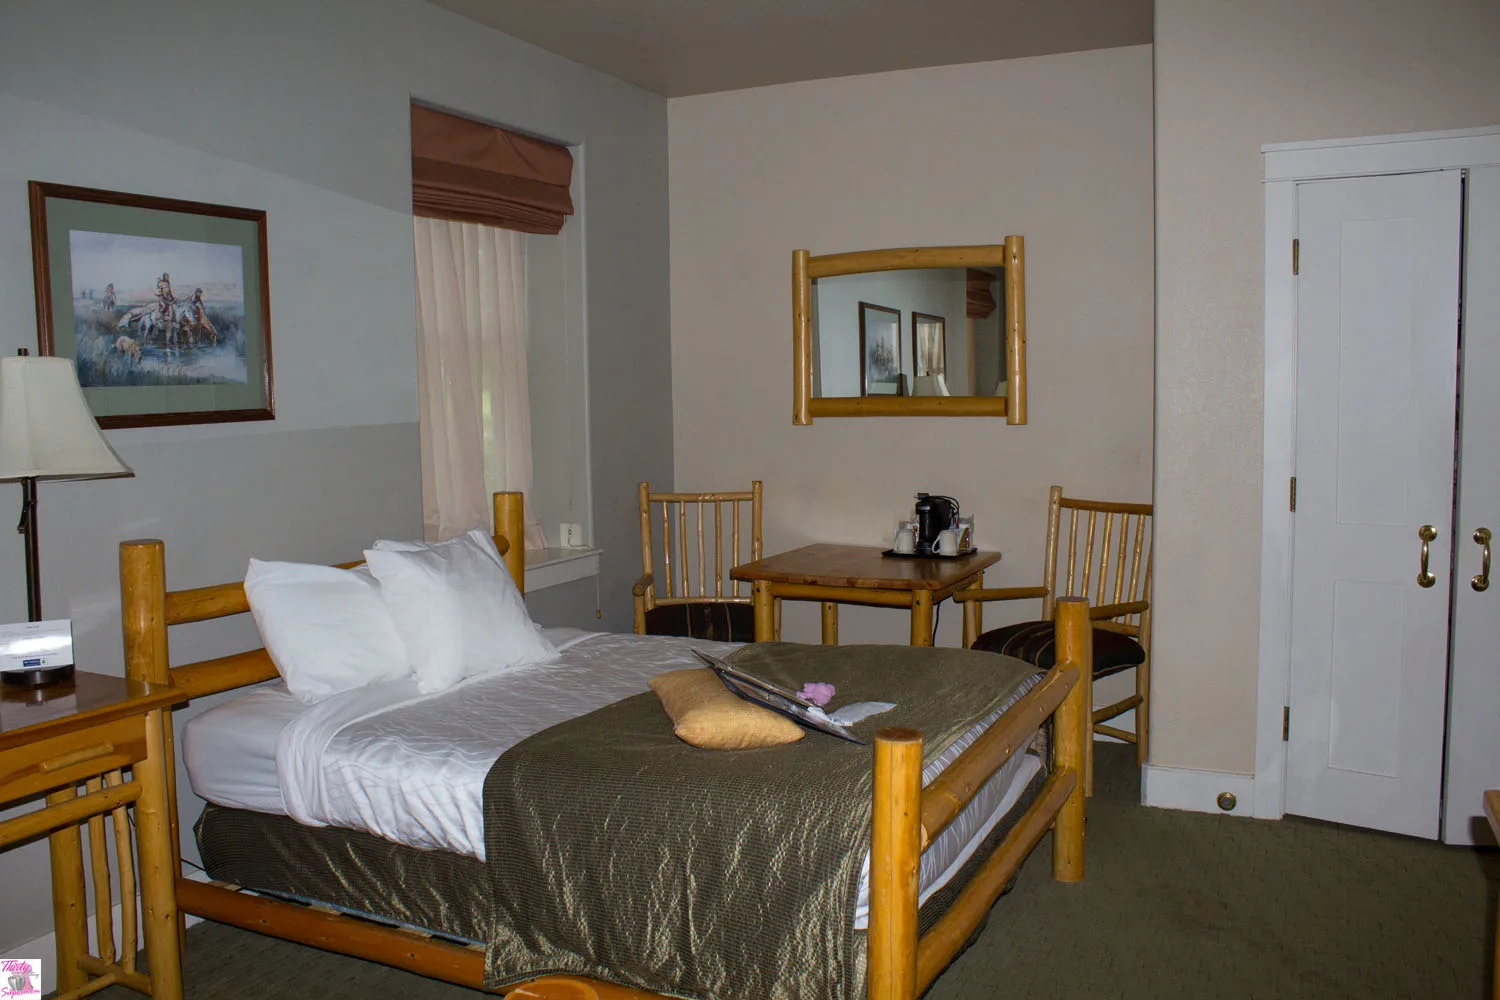 Where to Stay in Thermopolis Wyoming